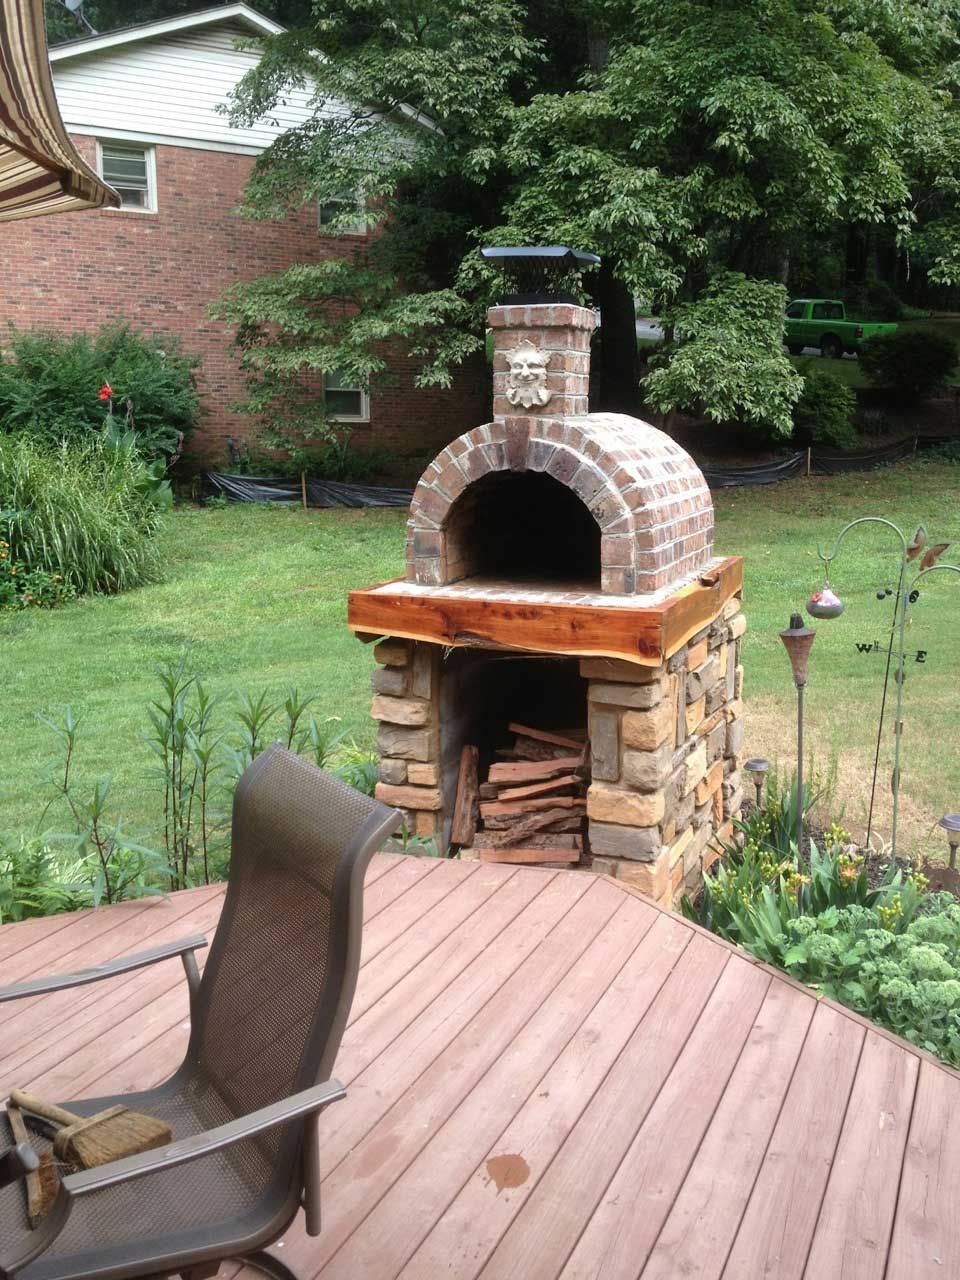 Feel Like A Real Baker With Your Own Brick Oven